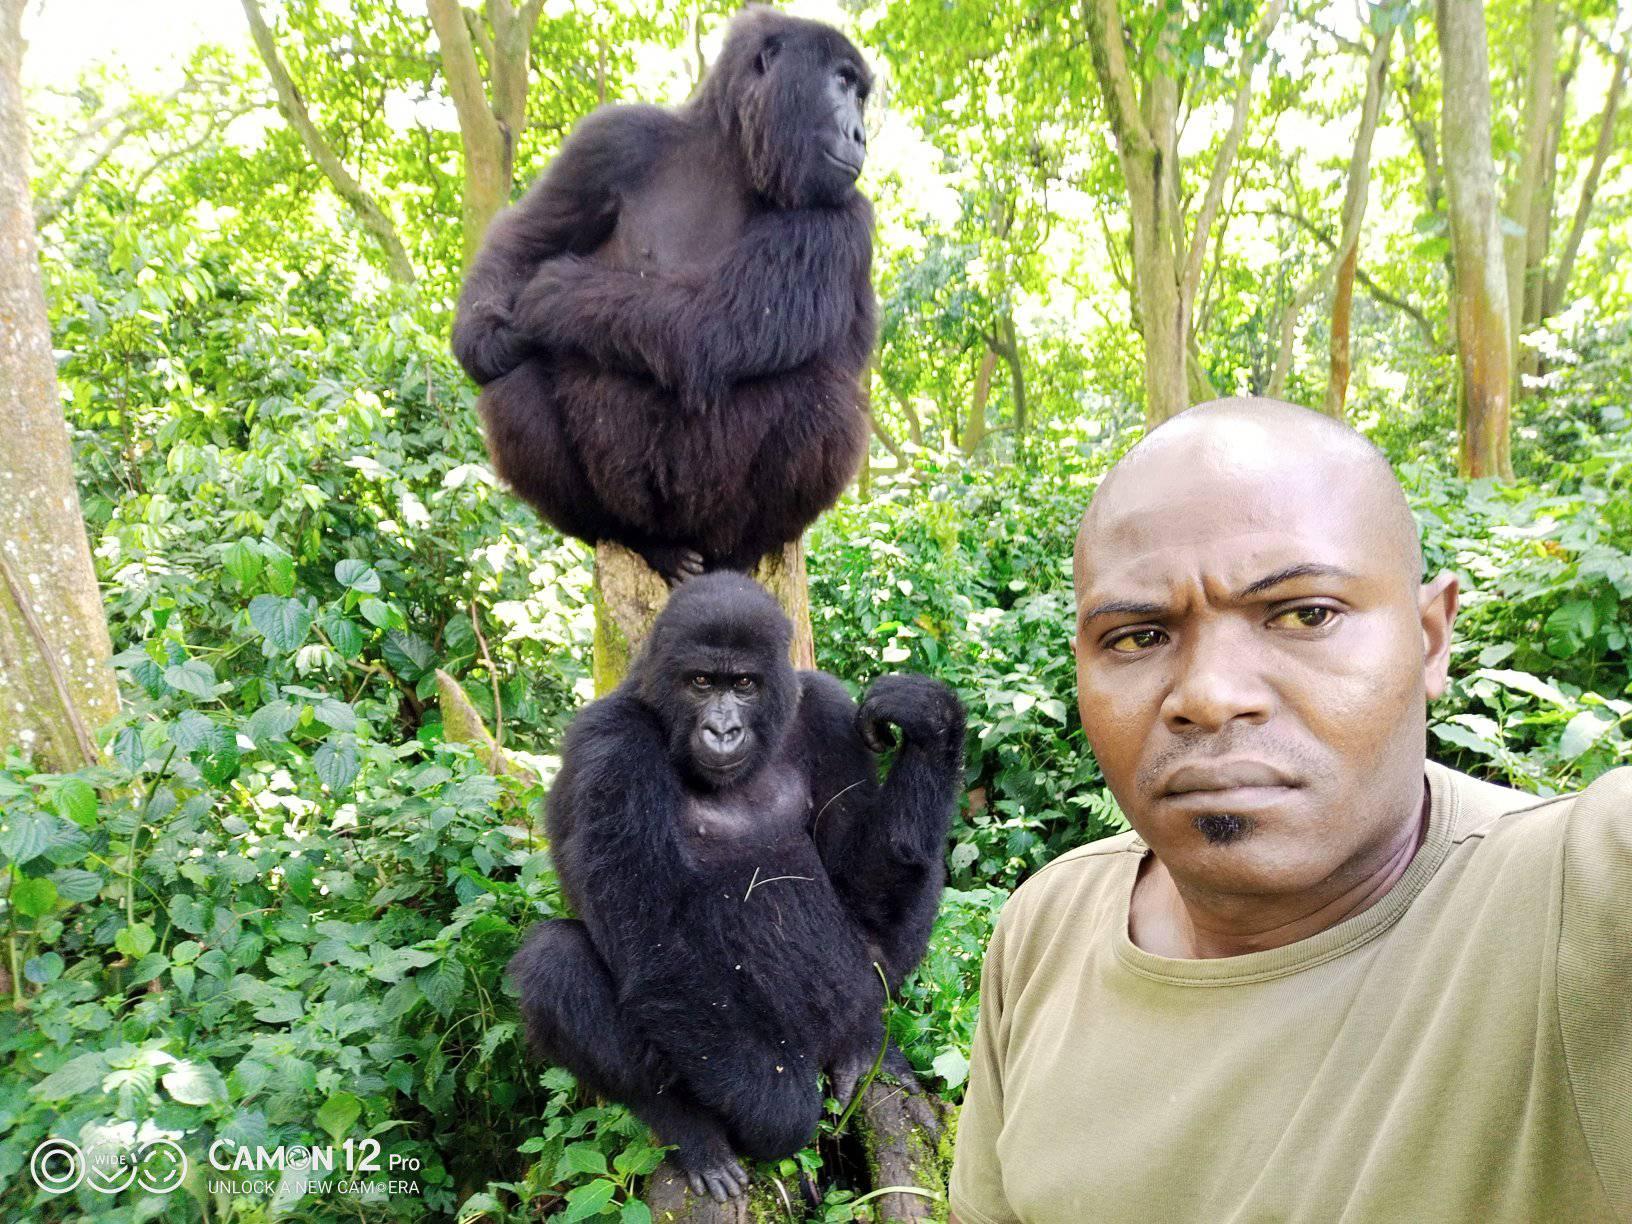 The staff’s extraordinary work would not be possible without the help of individuals and organisations from around the world who have stepped up to support conservation efforts in Virunga.